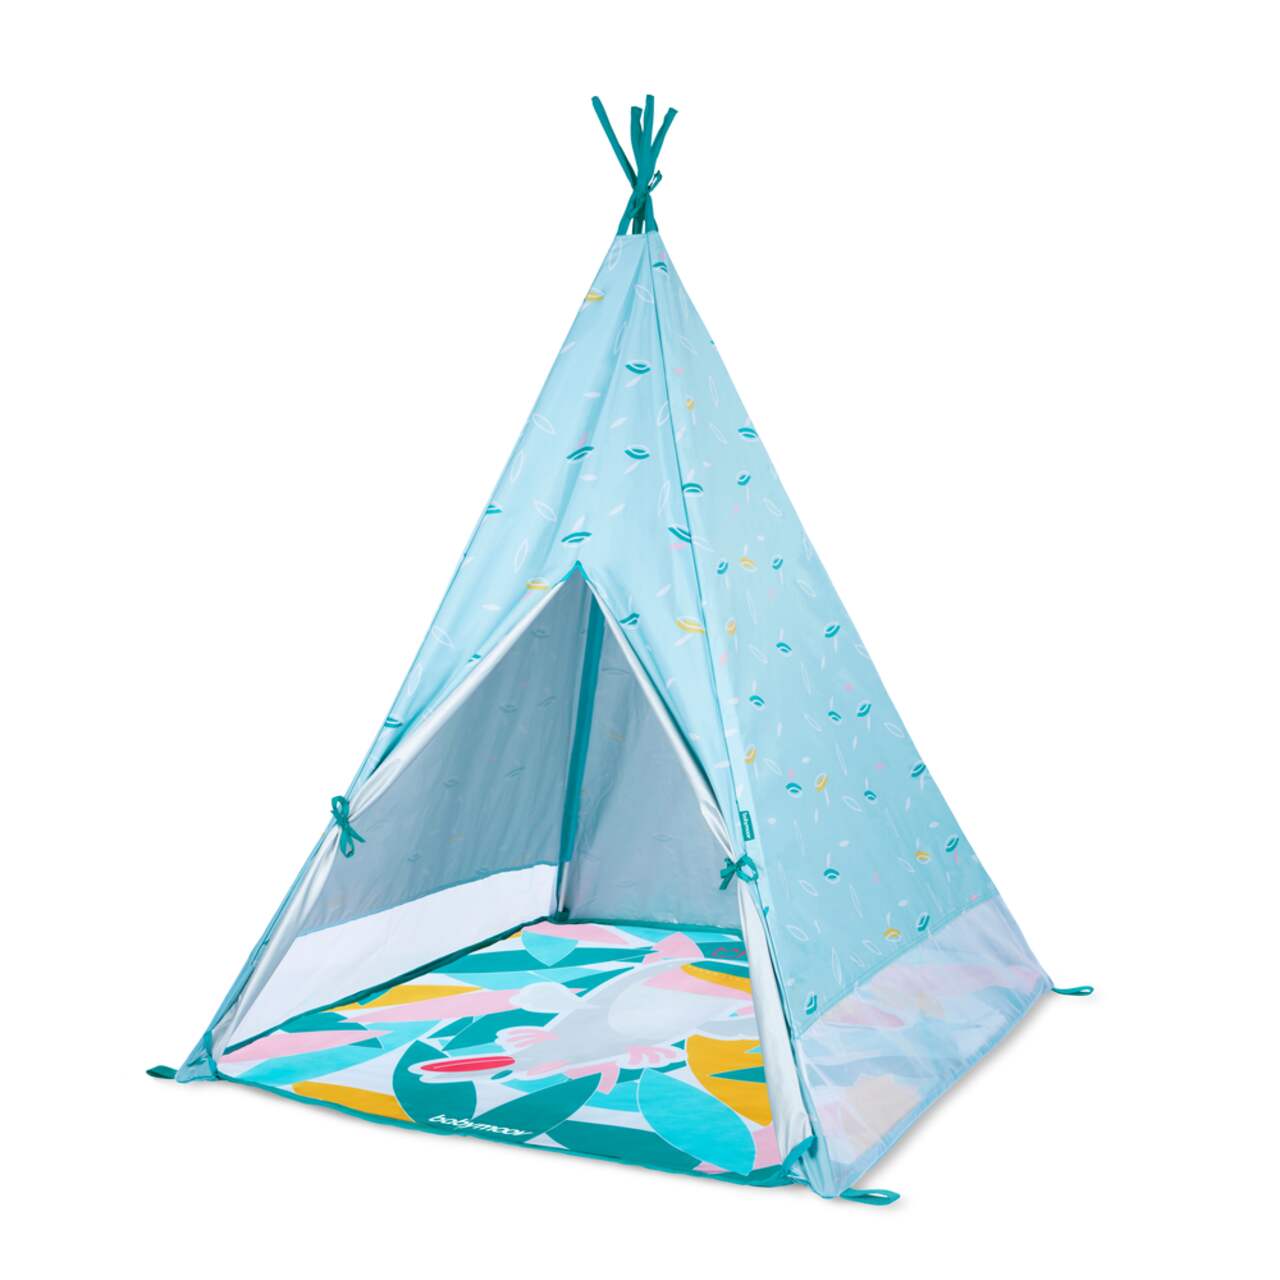 https://media-www.canadiantire.ca/product/automotive/car-care-accessories/child-travel-safety/5740751/tipi-jungle-15150d55-8ae9-4797-b0ae-c57d74adae68.png?imdensity=1&imwidth=640&impolicy=mZoom